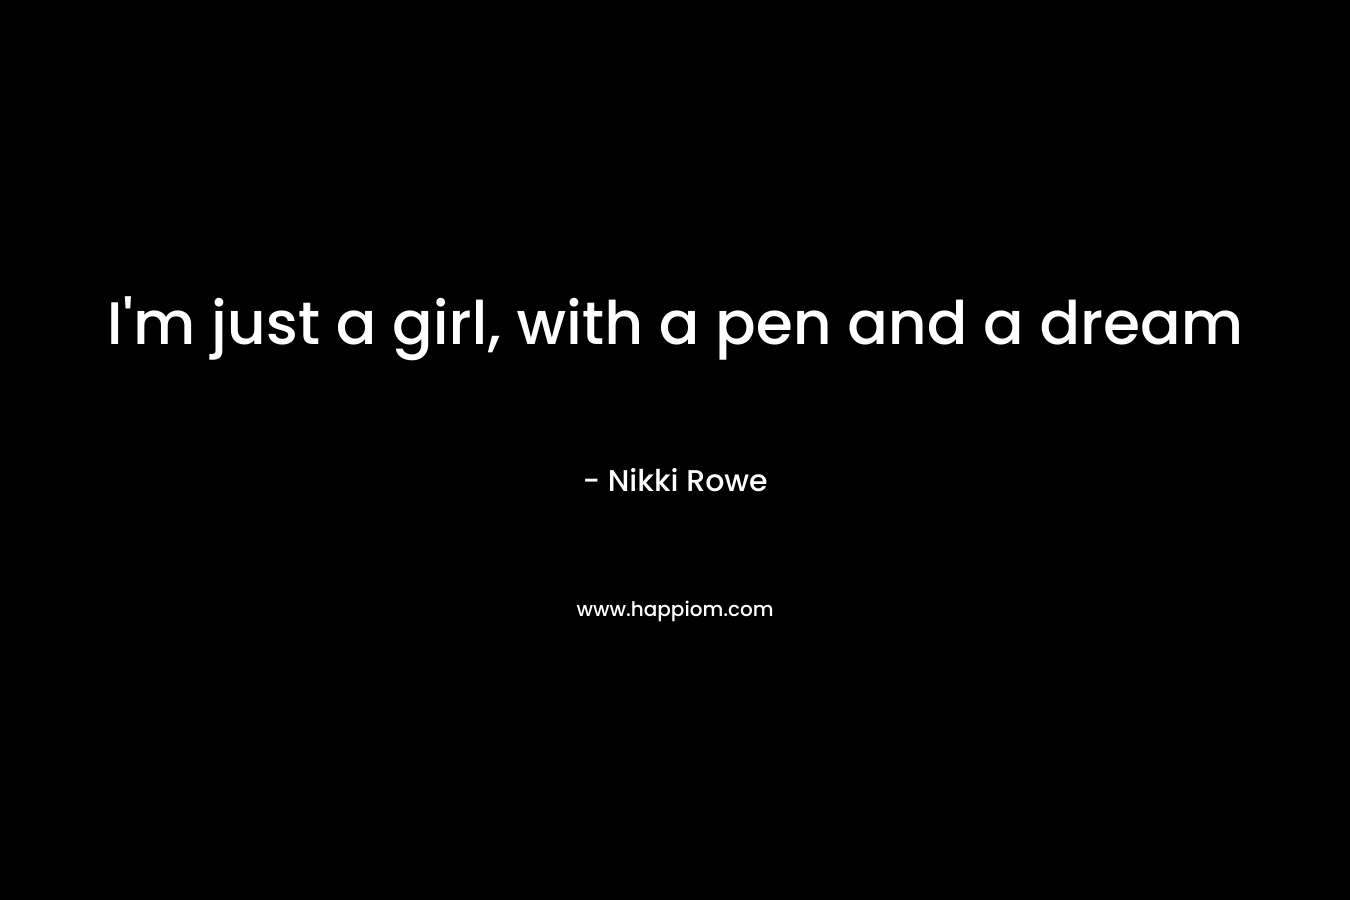 I'm just a girl, with a pen and a dream